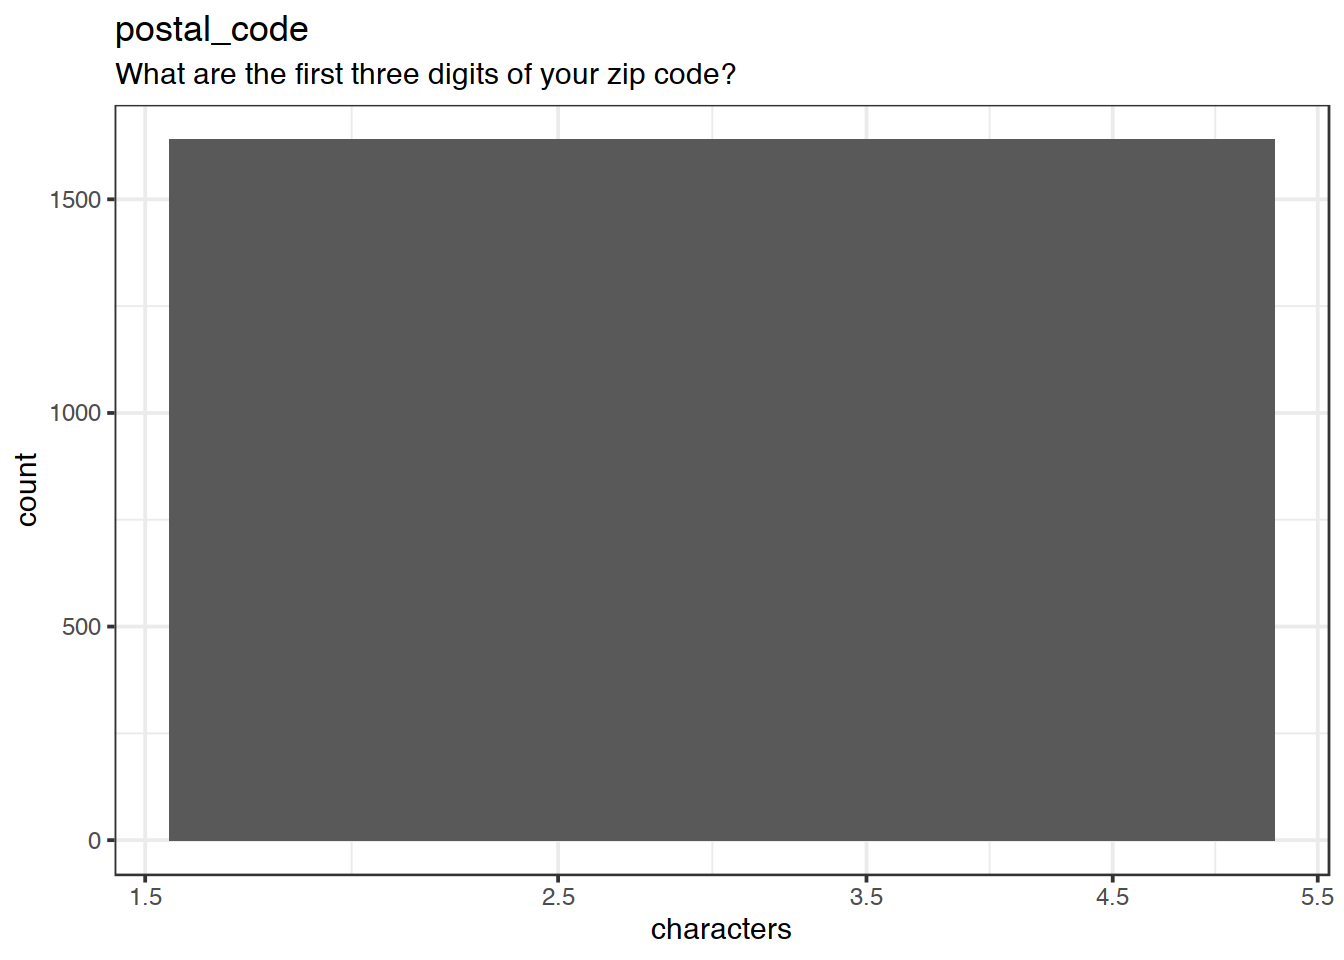 Distribution of values for postal_code